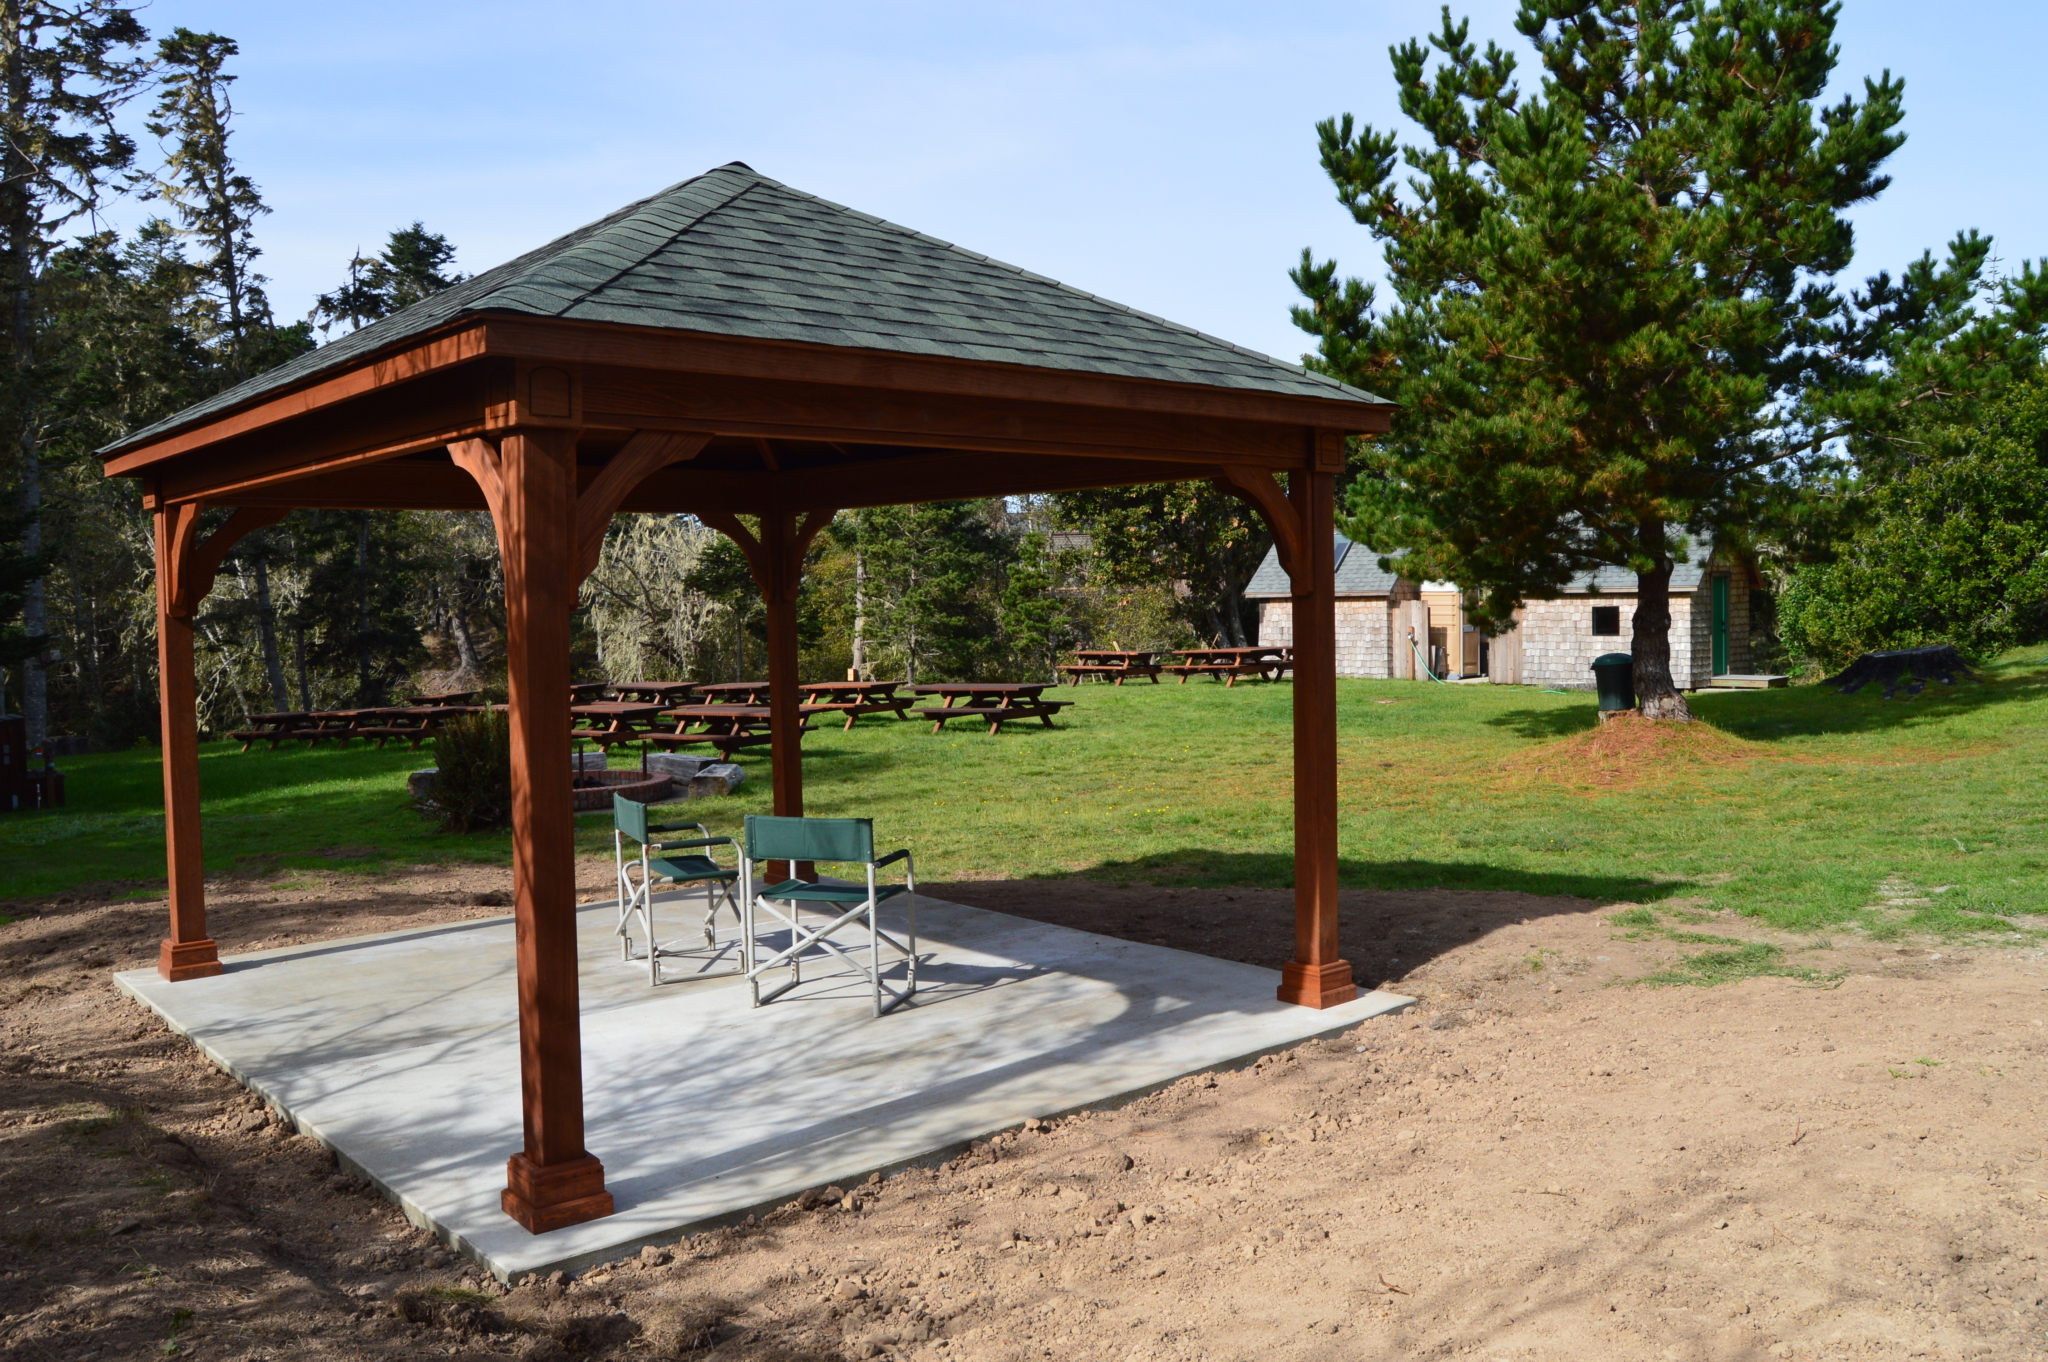 Small park shelter with two chairs under it and picnic tables in background